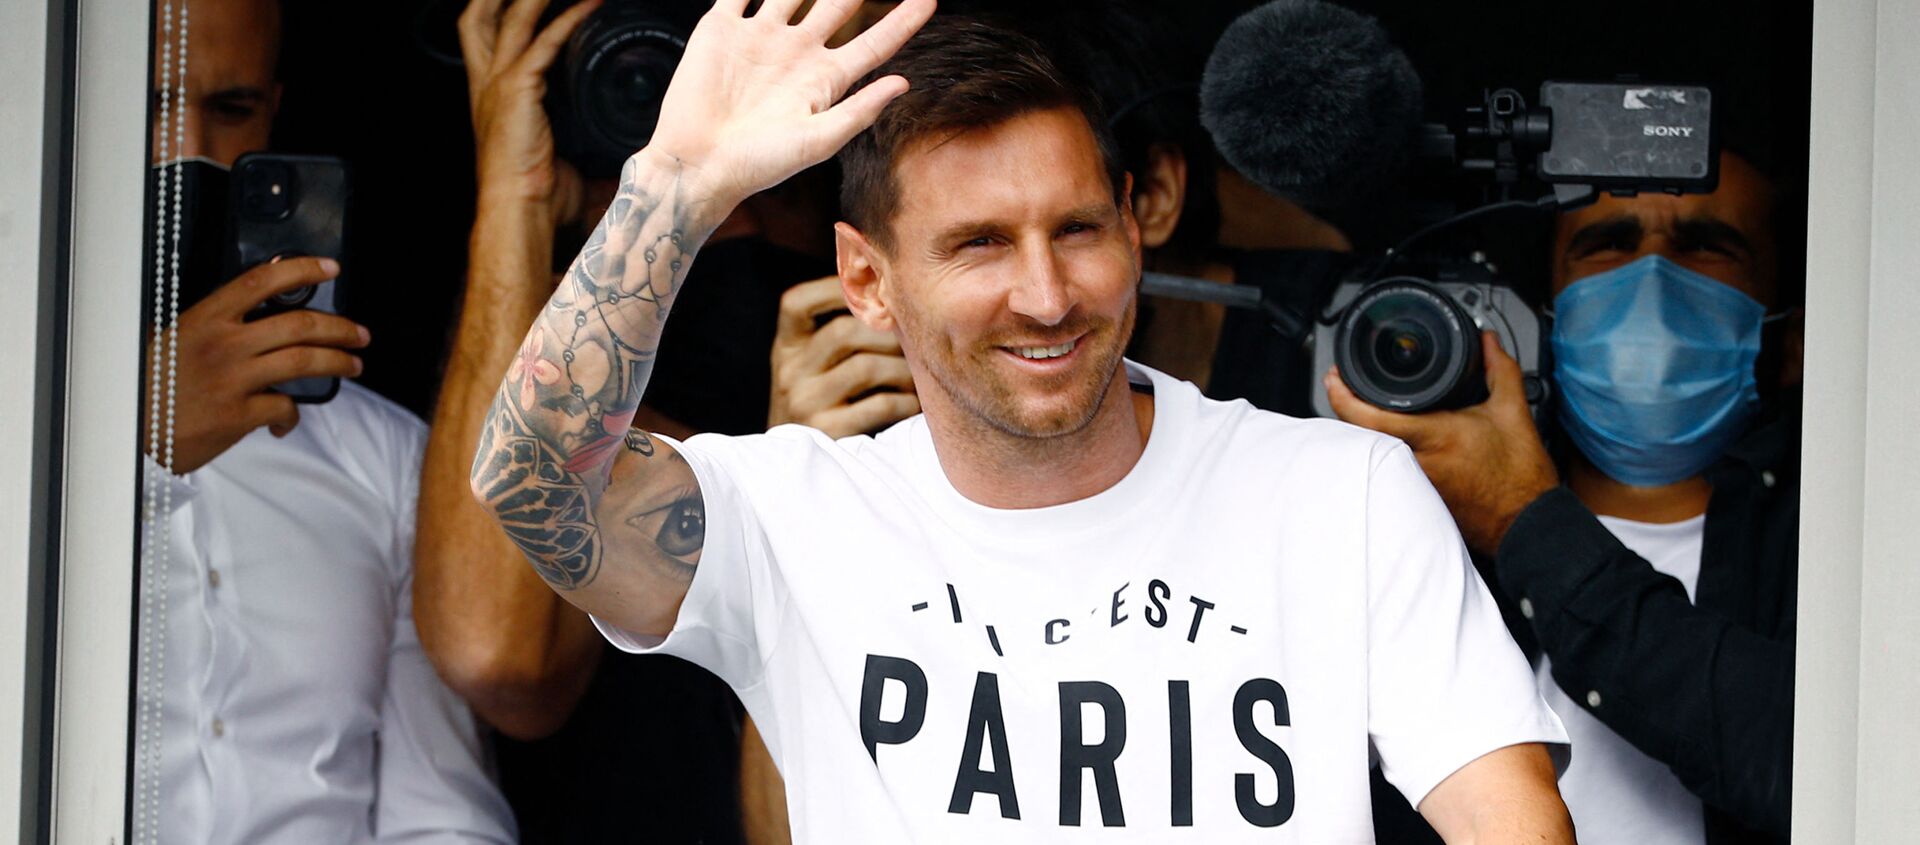 Argentinian football player Lionel Messi waves to supporters from a window after he landed on August 10, 2021 at Le Bourget airport, north of Paris, to become Paris Saint-Germain's new player - Sputnik International, 1920, 10.08.2021